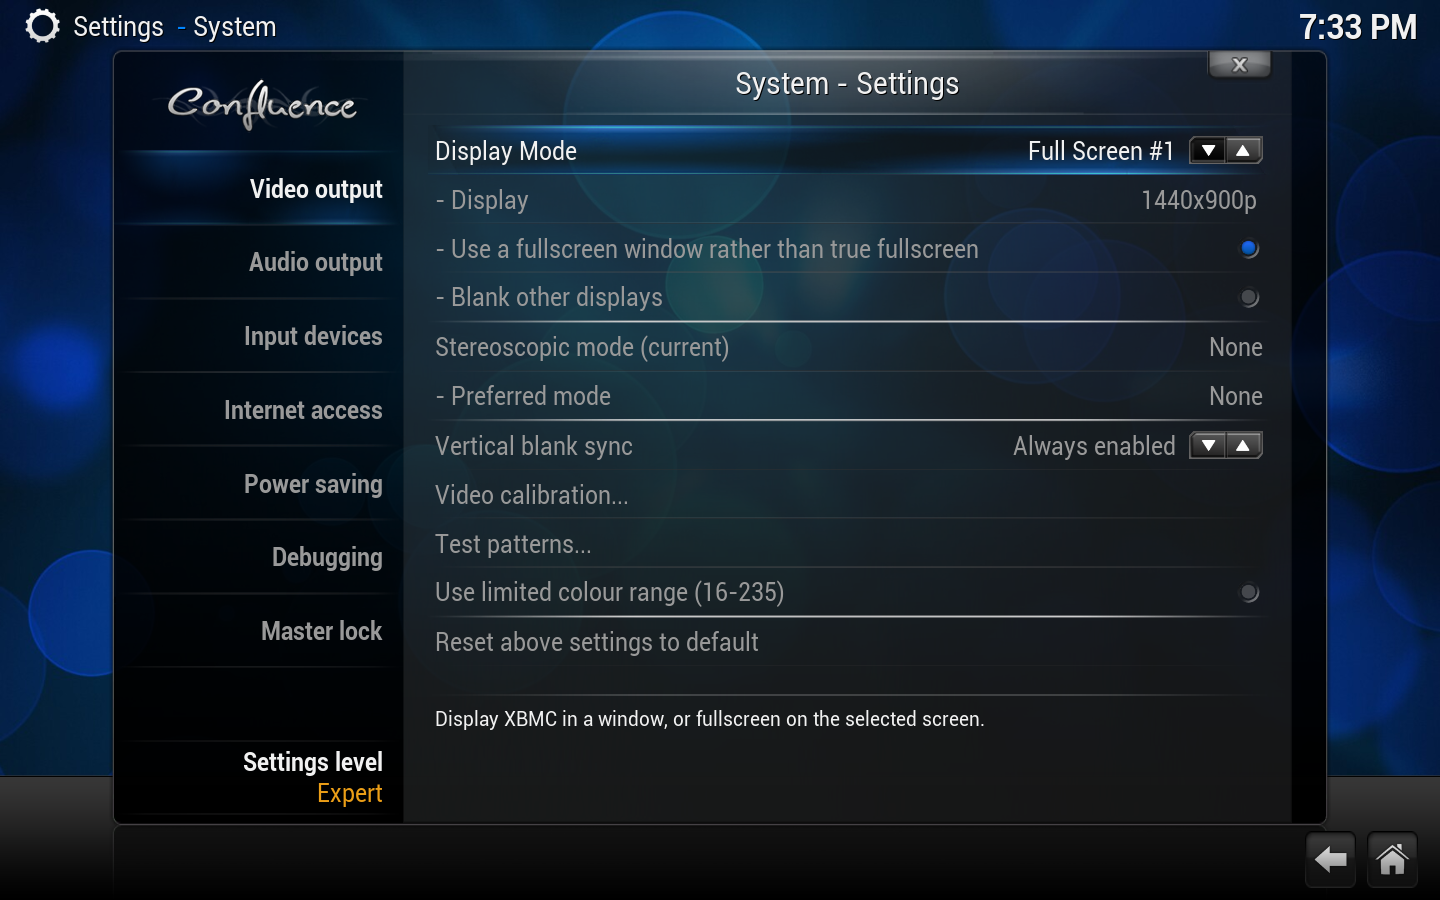 File:Settings.system.video output.png